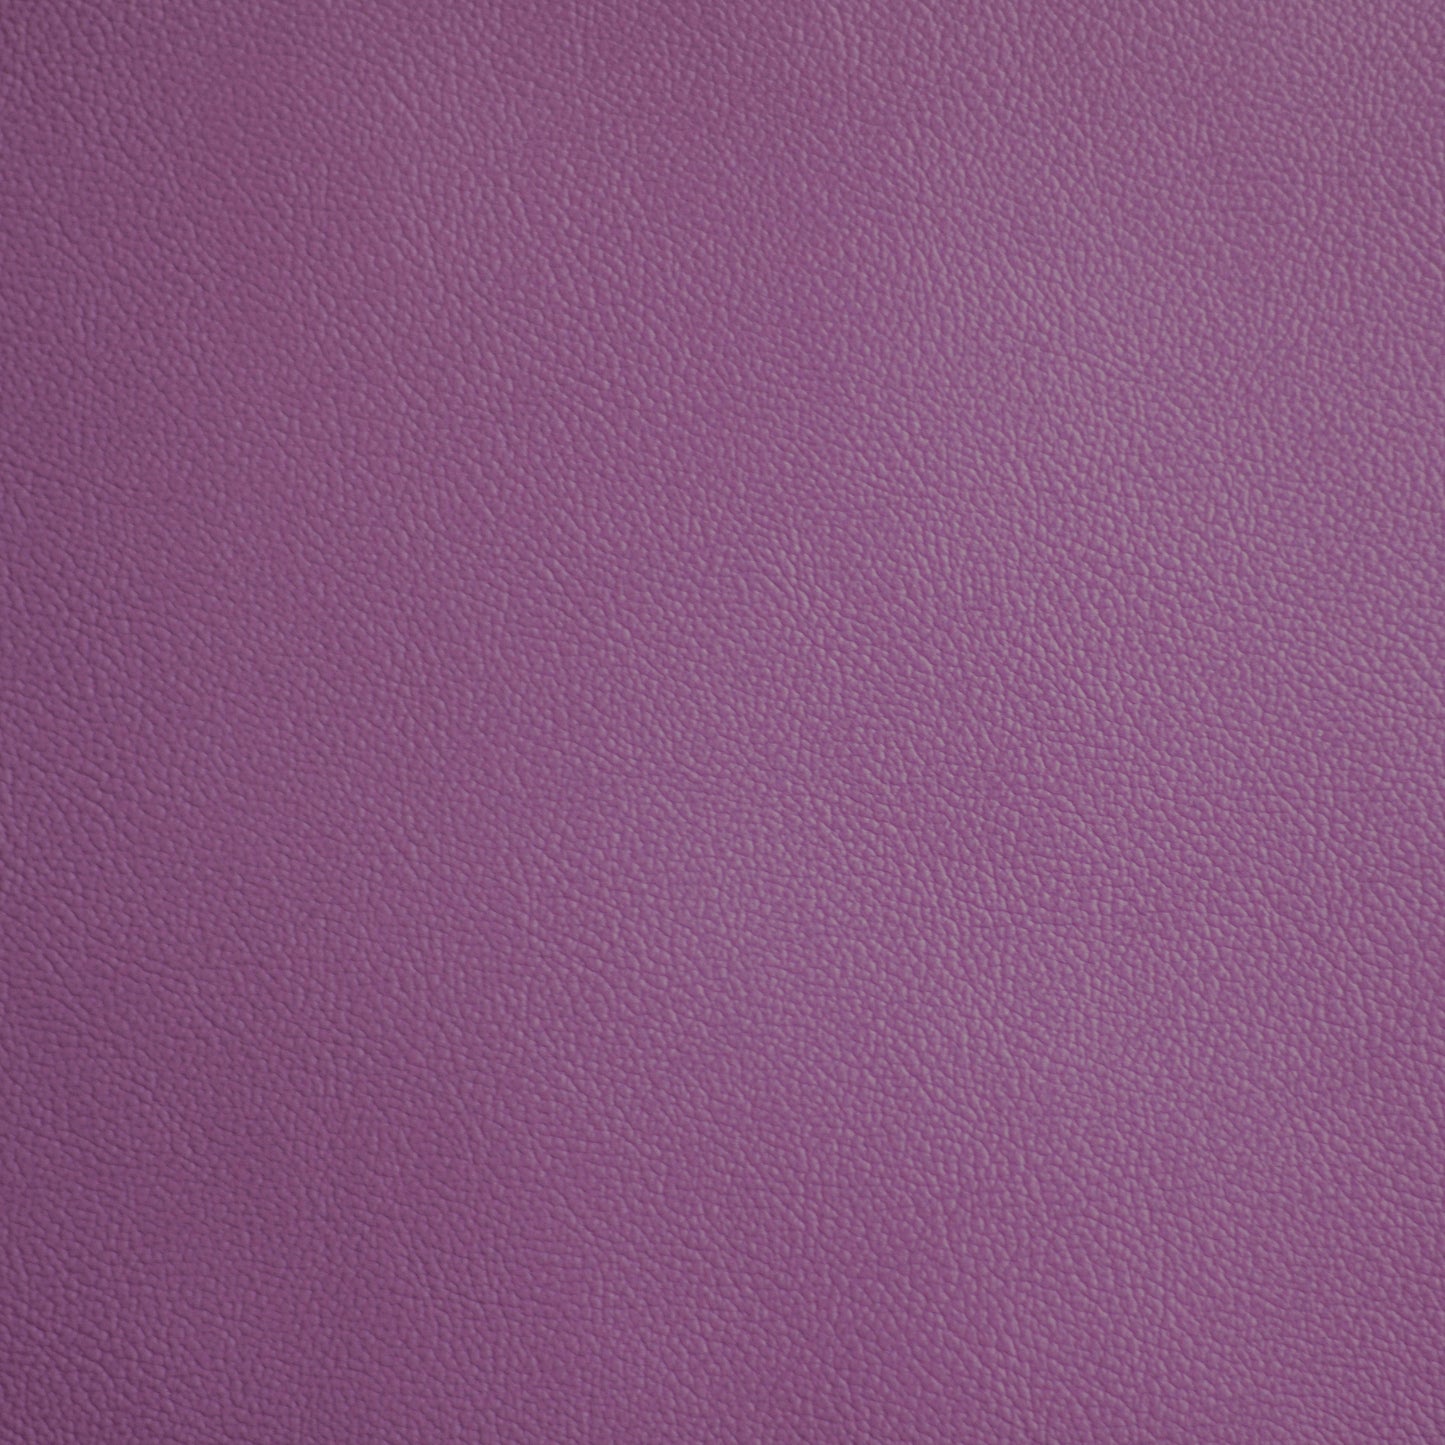 Empire, Concord, Iconic® Antimicrobial & Cleanable, Hospitality Leather Hide